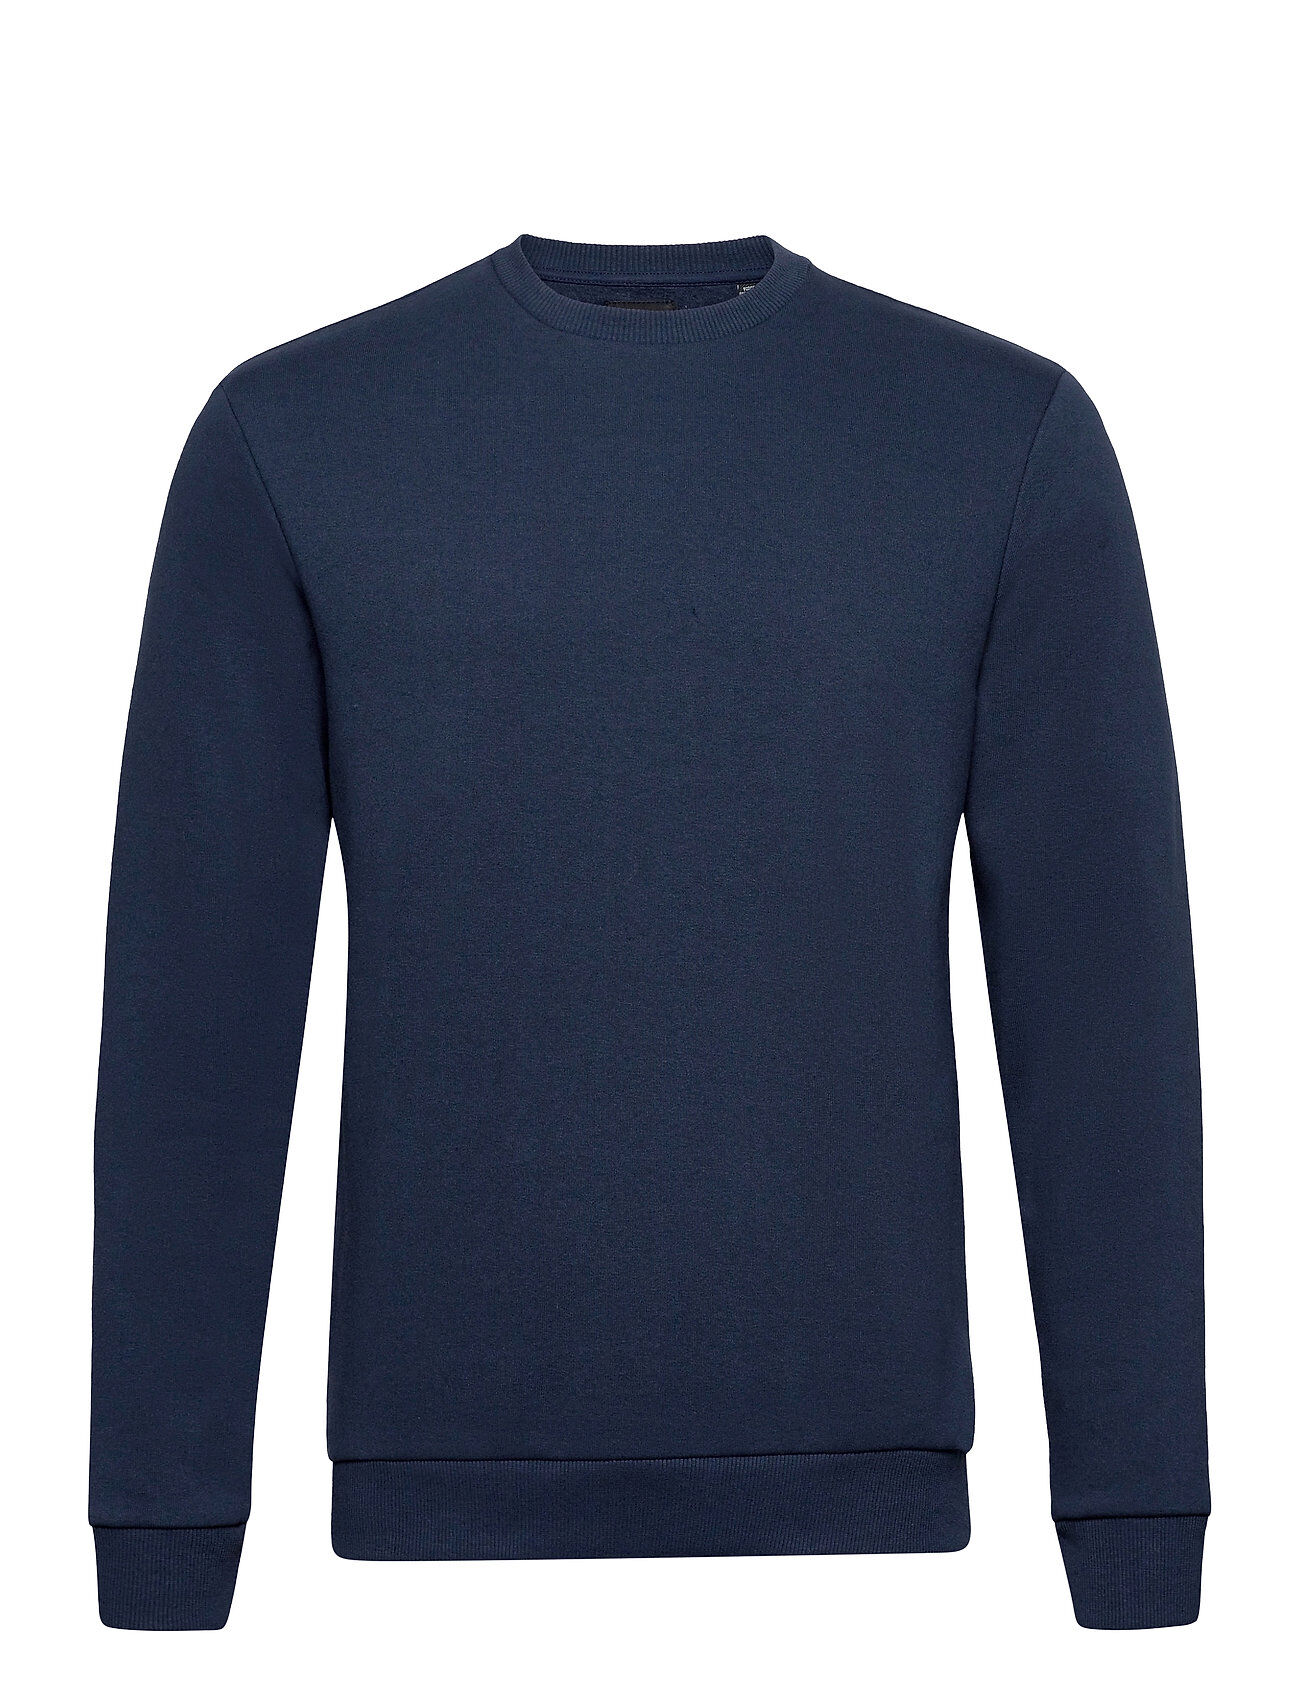 ONLY & SONS Onsceres Crew Neck Sweat-shirt Genser Blå ONLY & SONS